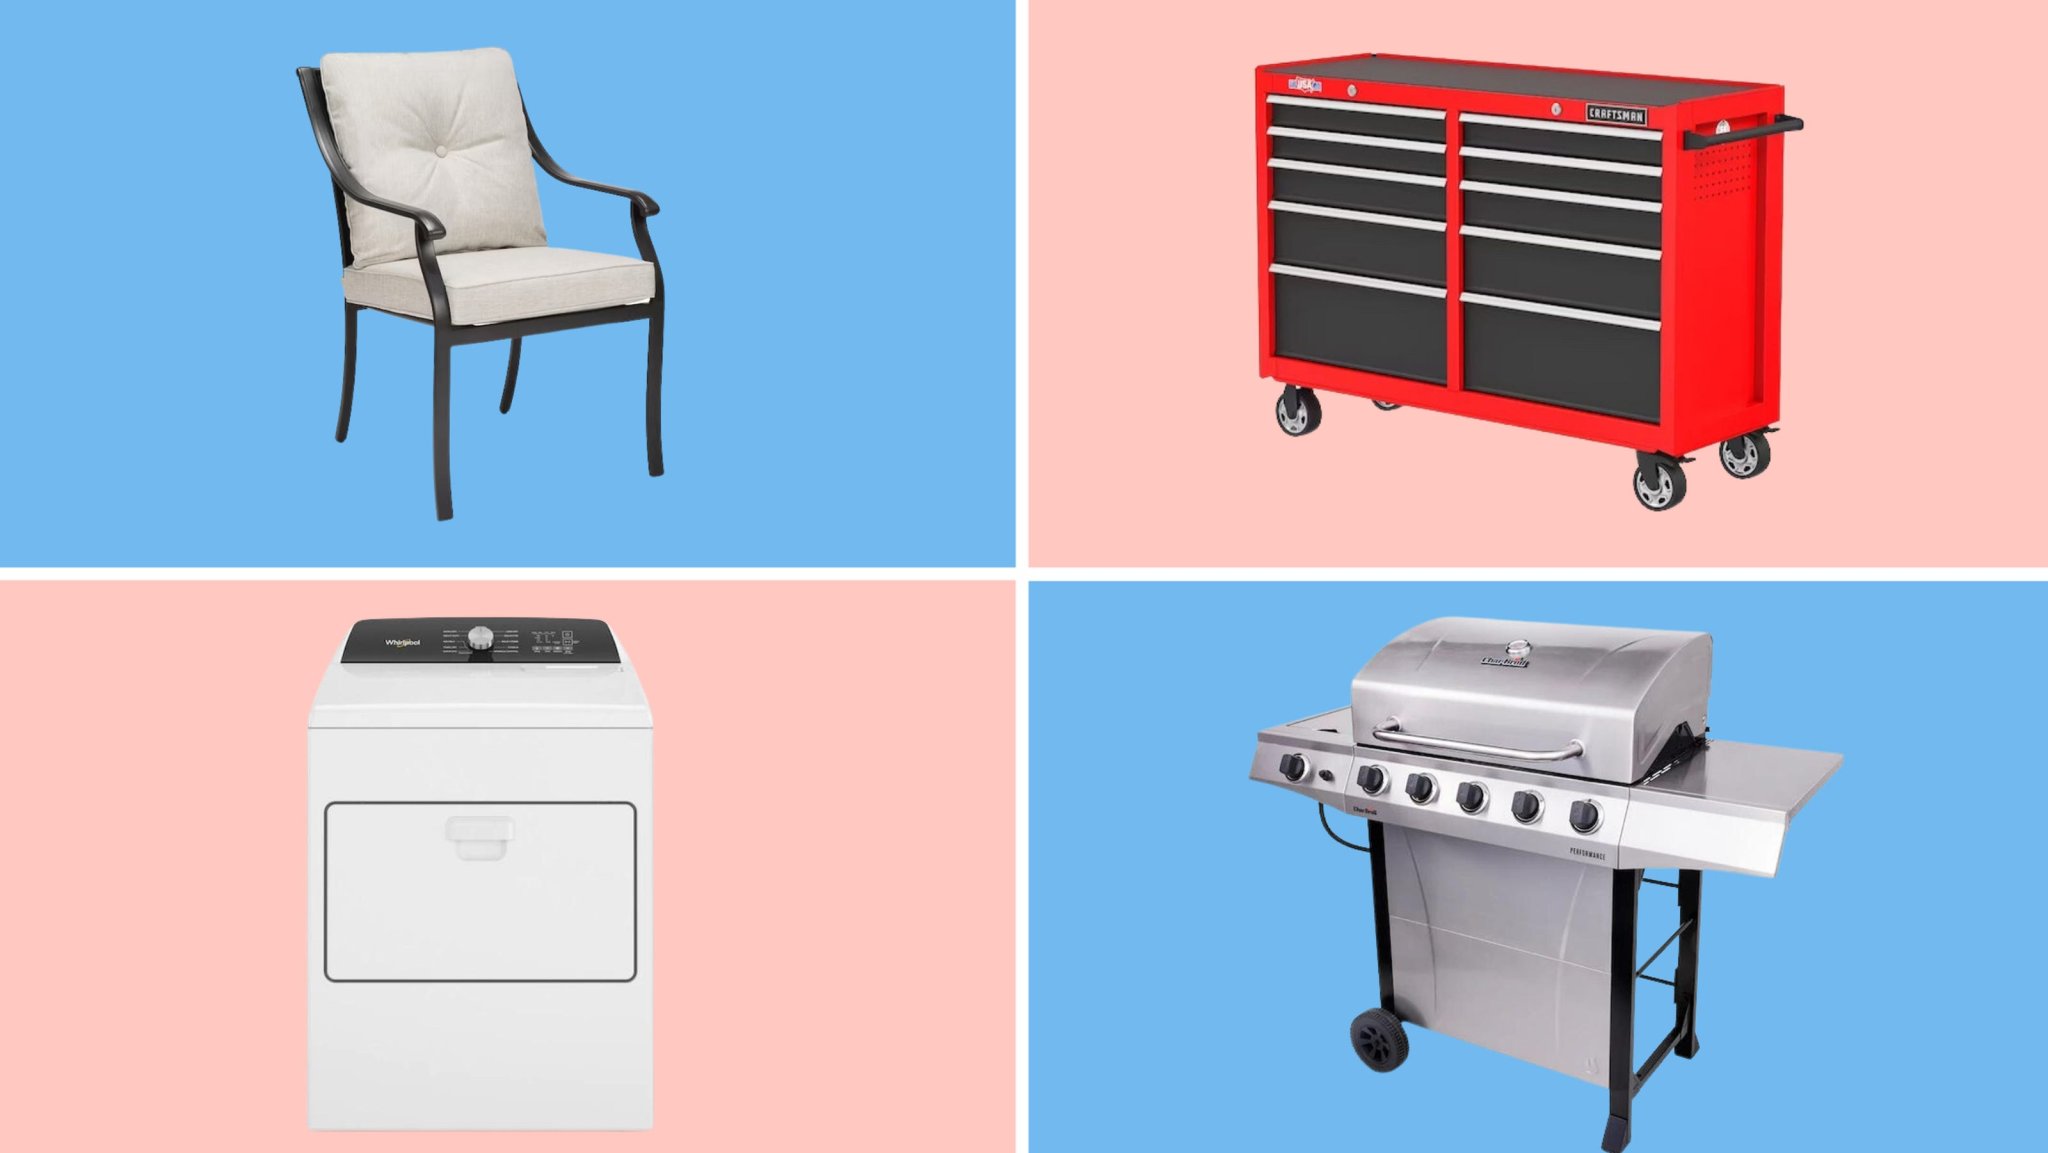 Lowe's Springfest sale is here with top deals on home essentials from EGO, Whirlpool and Craftsman